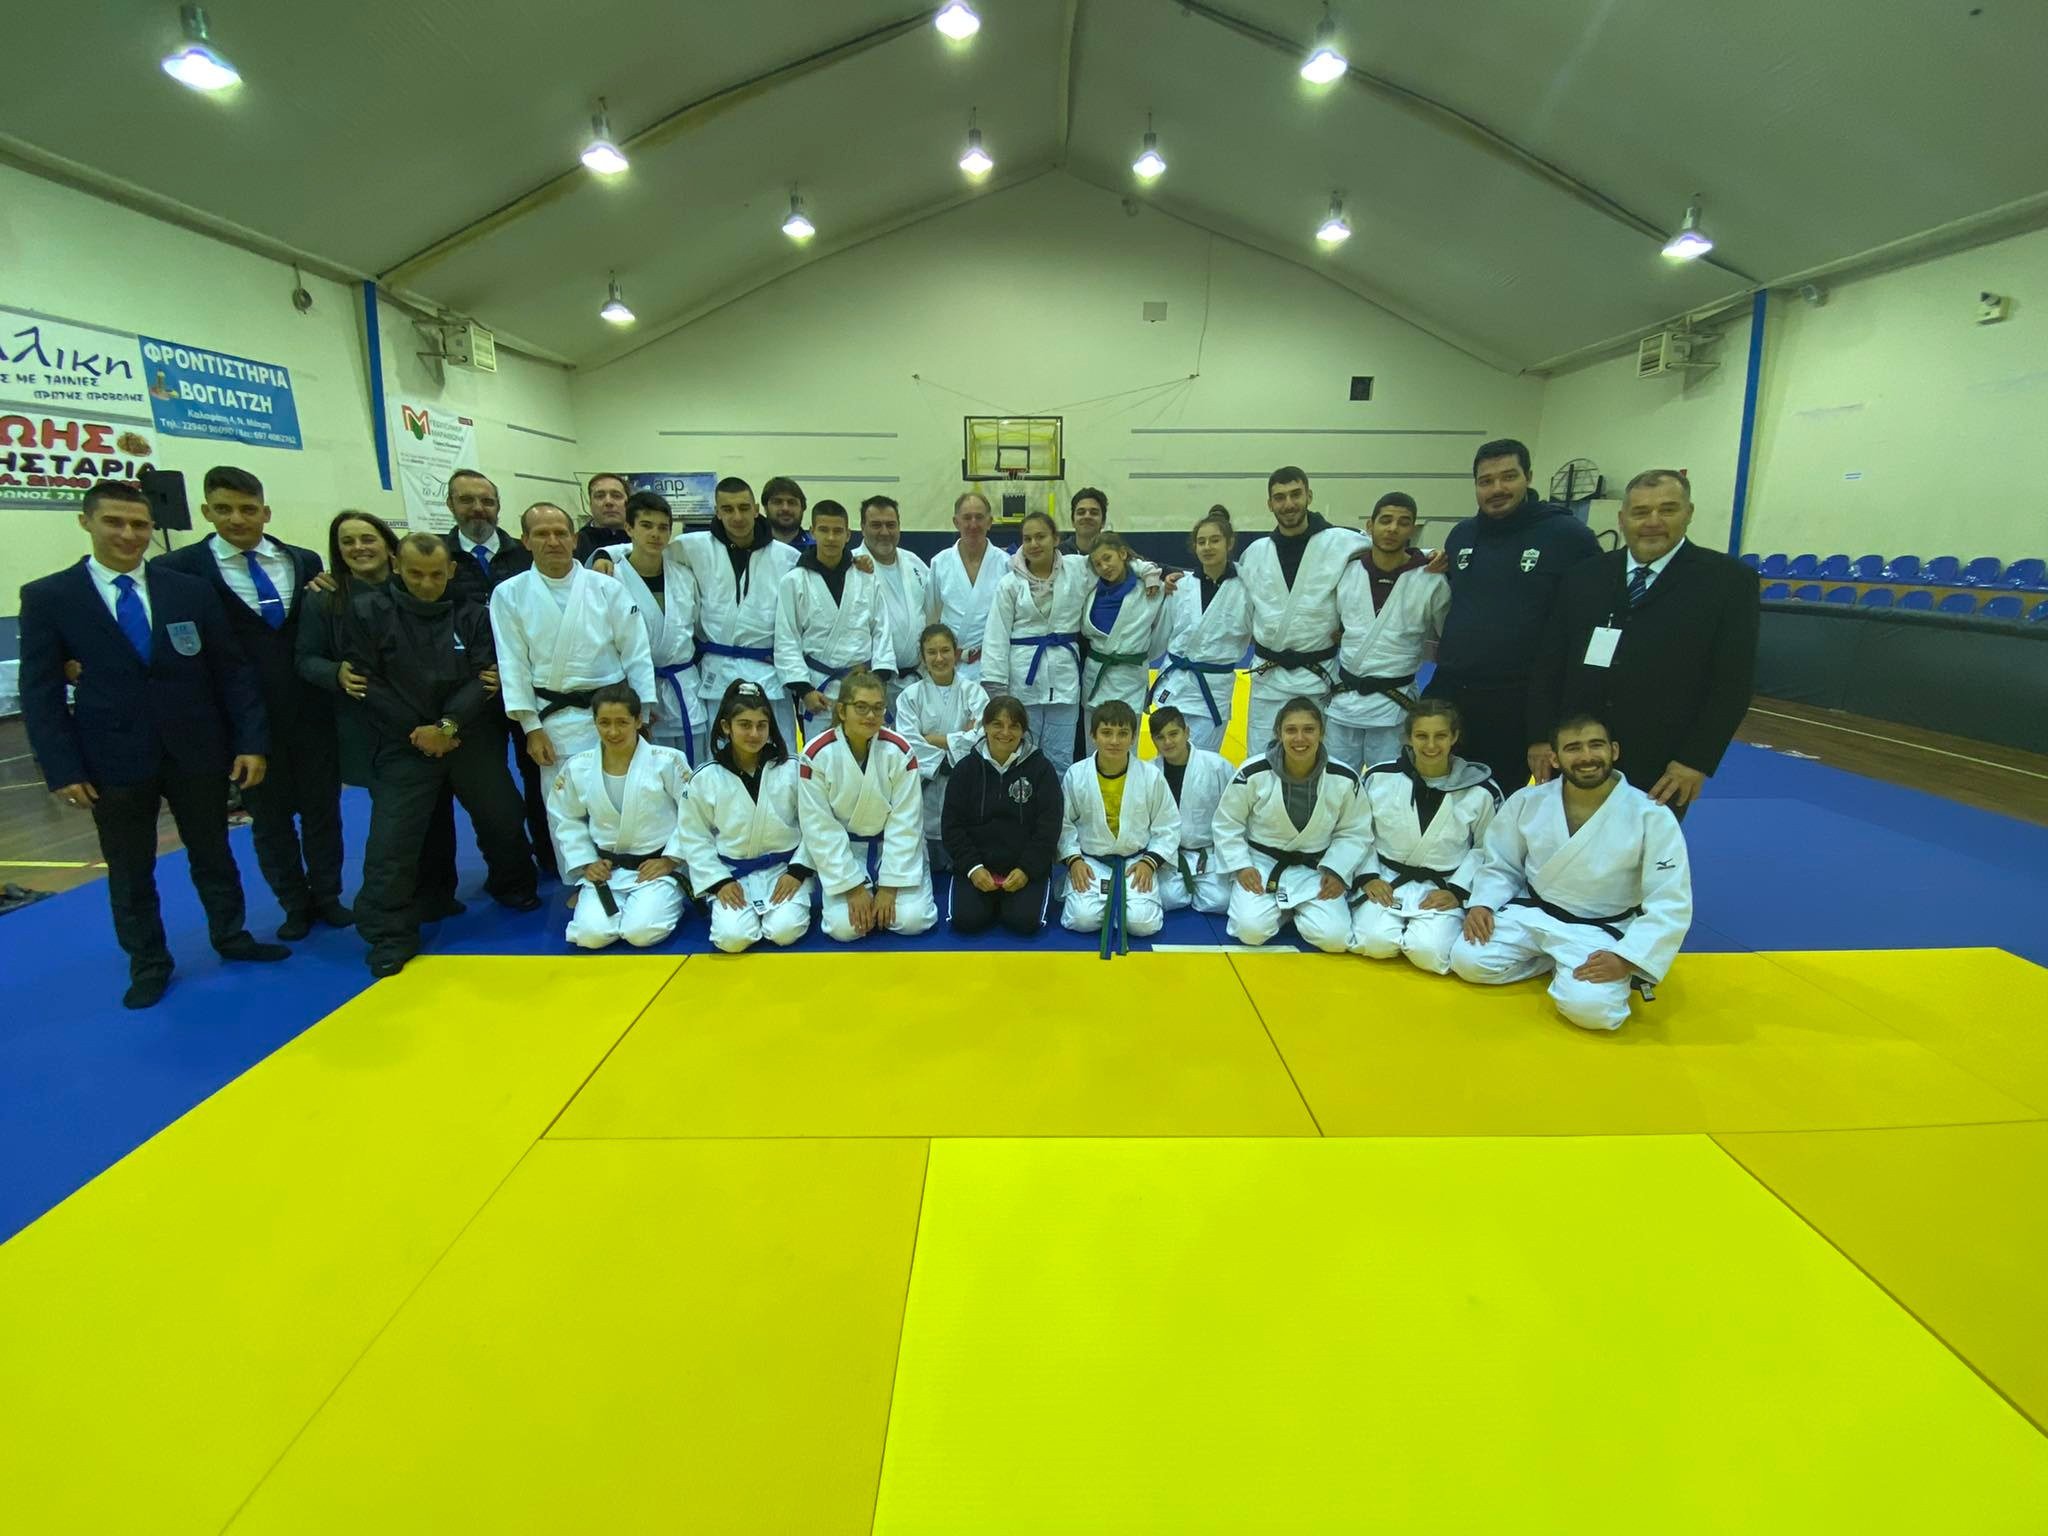 GREECE CONTINUE TO DEVELOP THEIR KATA STRUCTURE